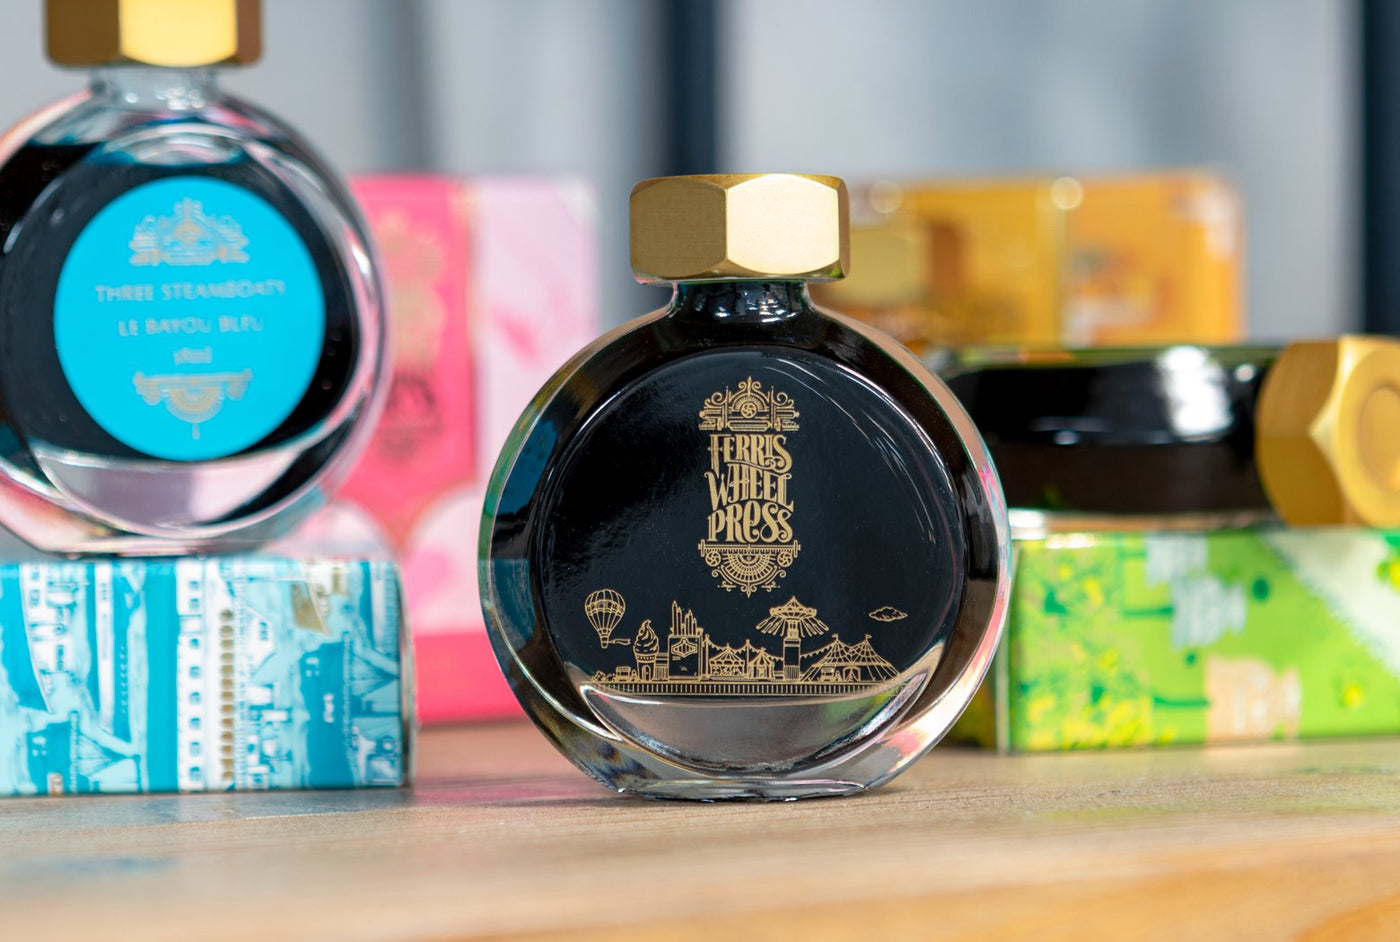  Ferris Wheel Press a Canadian company  founded in 2017. these Inks are packaged beautify and these Ink are the essences of Luxury